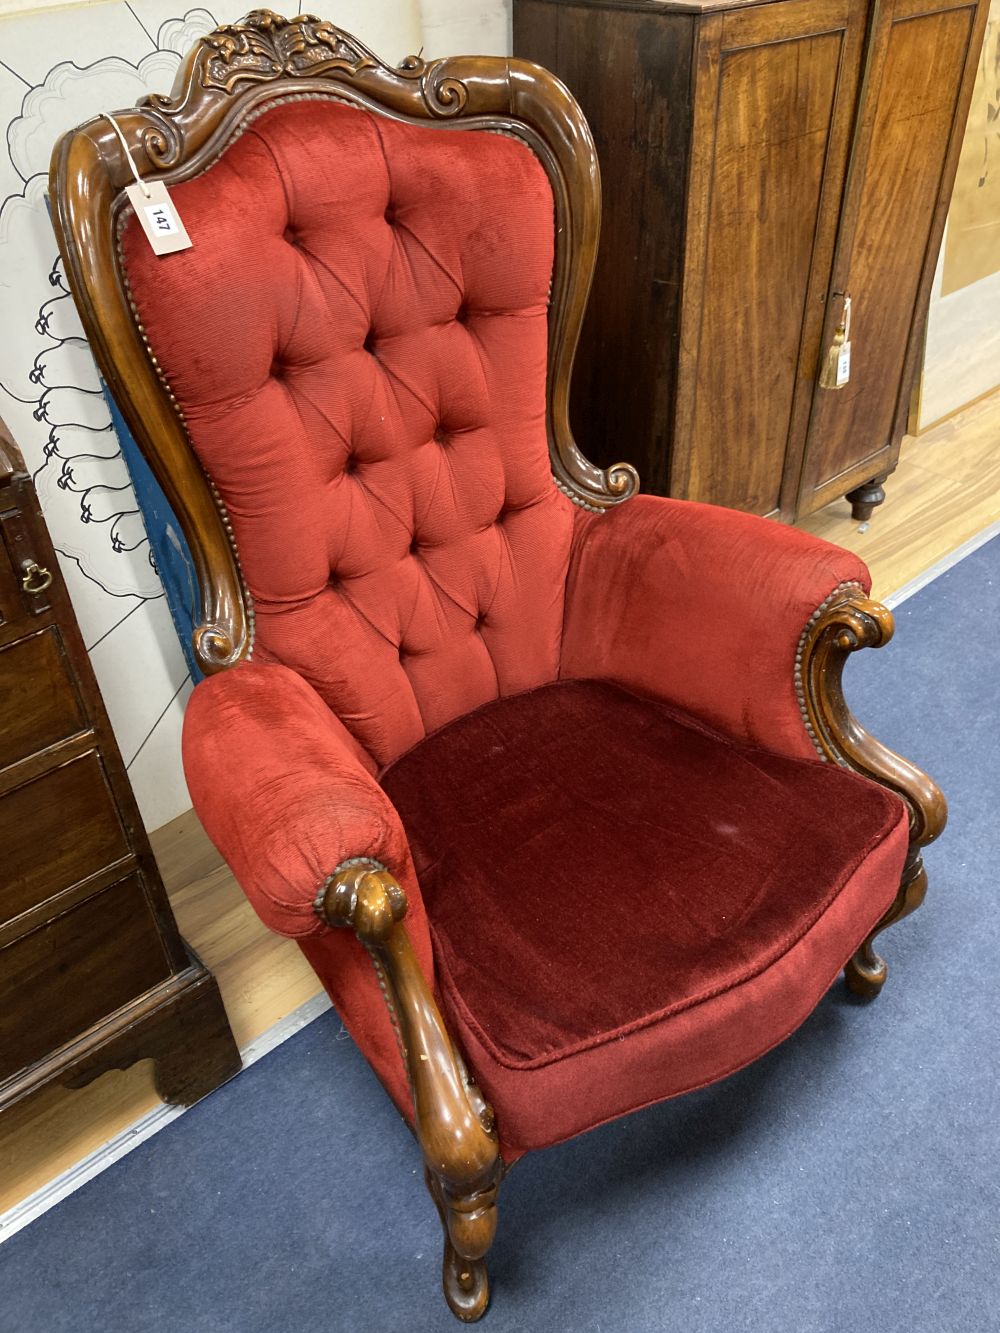 A reproduction Victorian style armchair